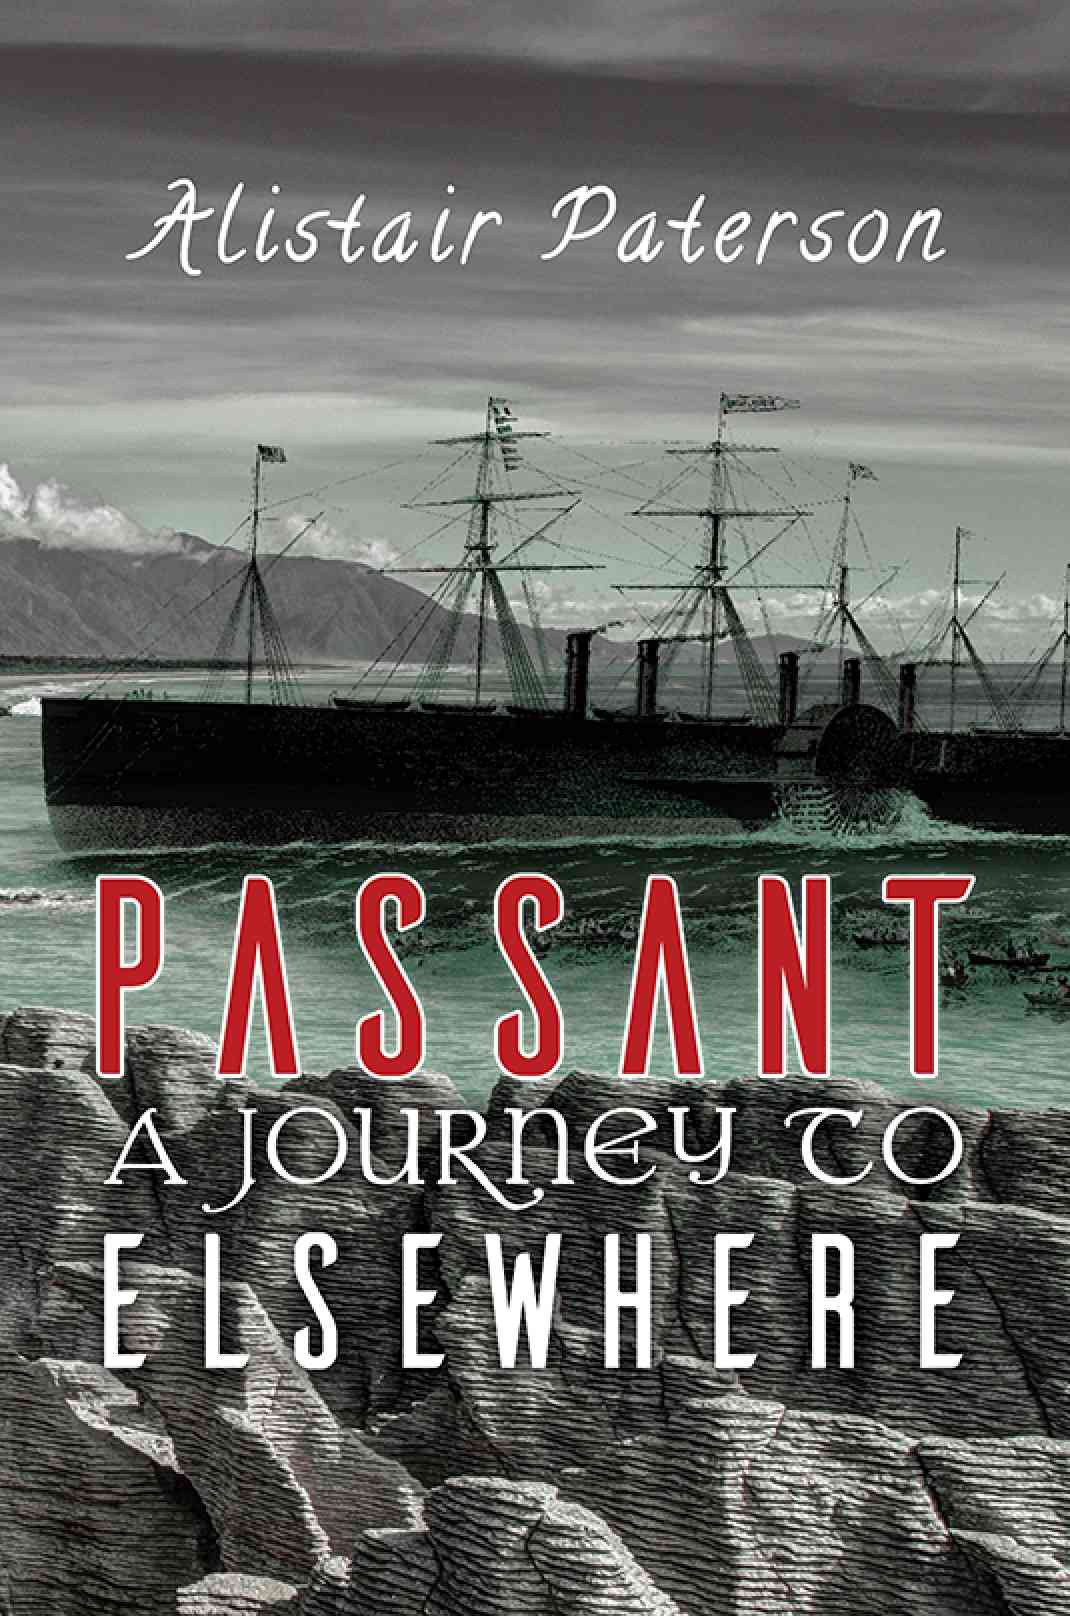 Engaging and Enlightening ‘Passant’ gets reviewed by Reid’s Reader